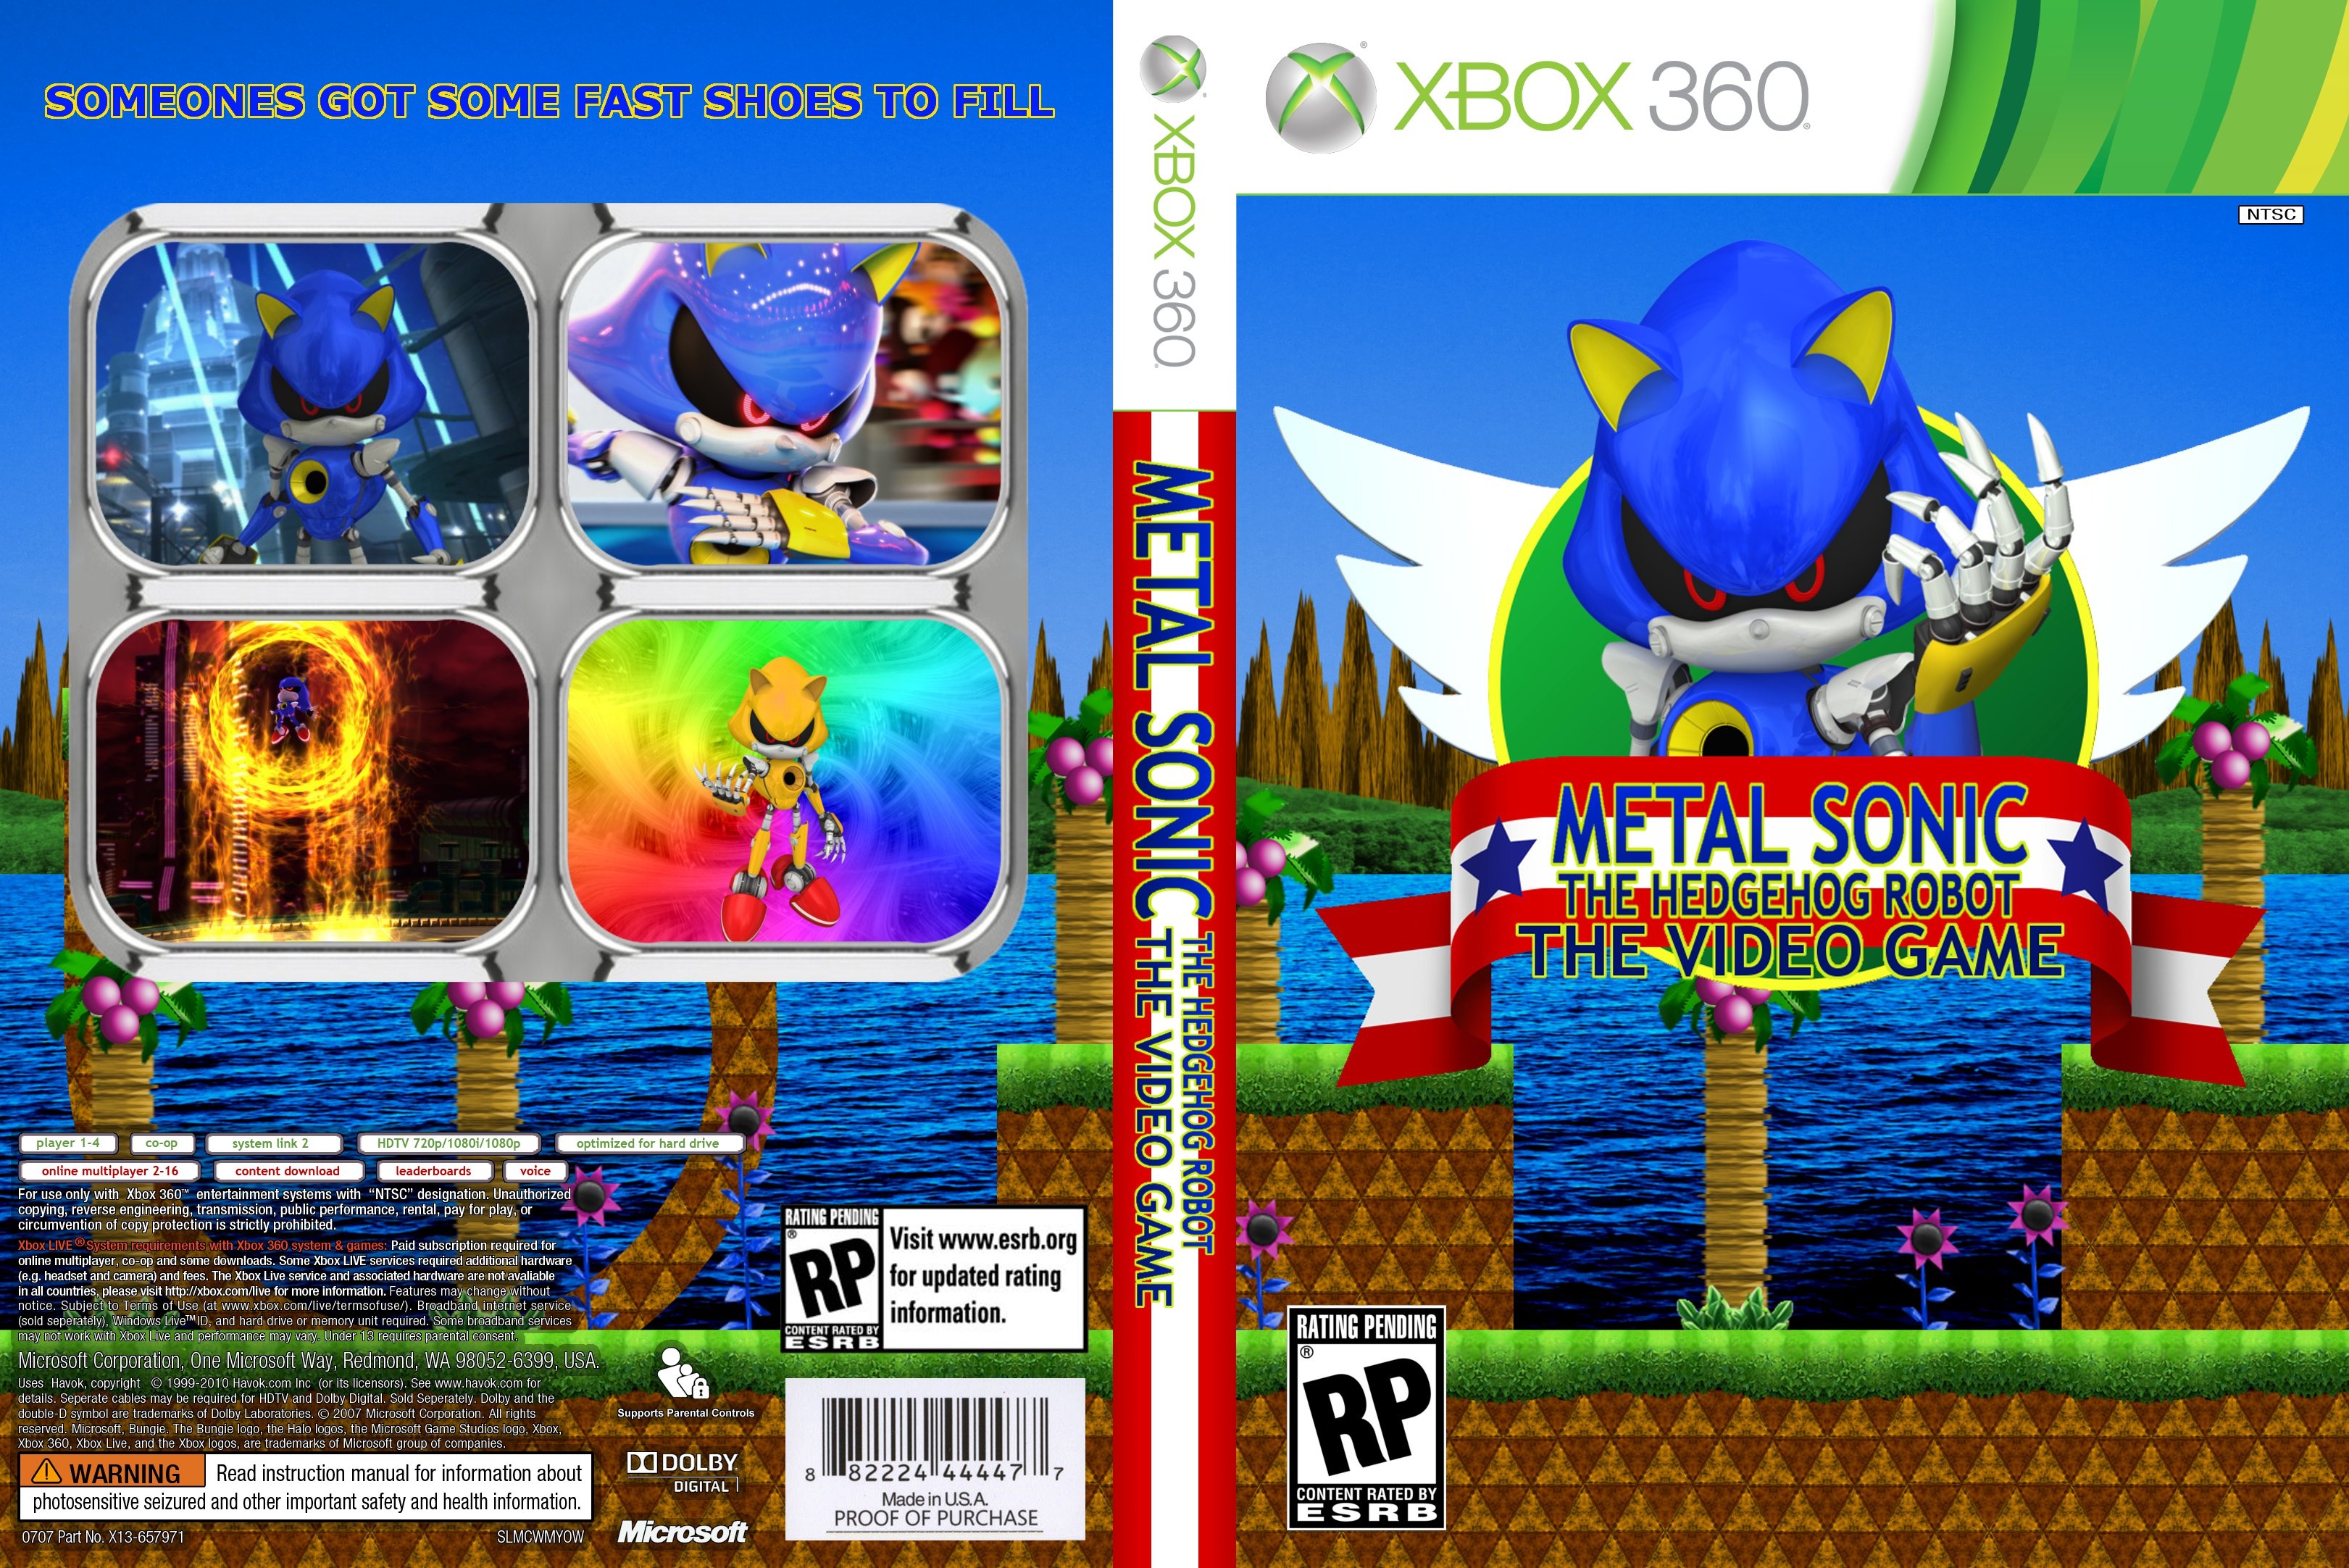 Metal Sonic:The Video Game box cover